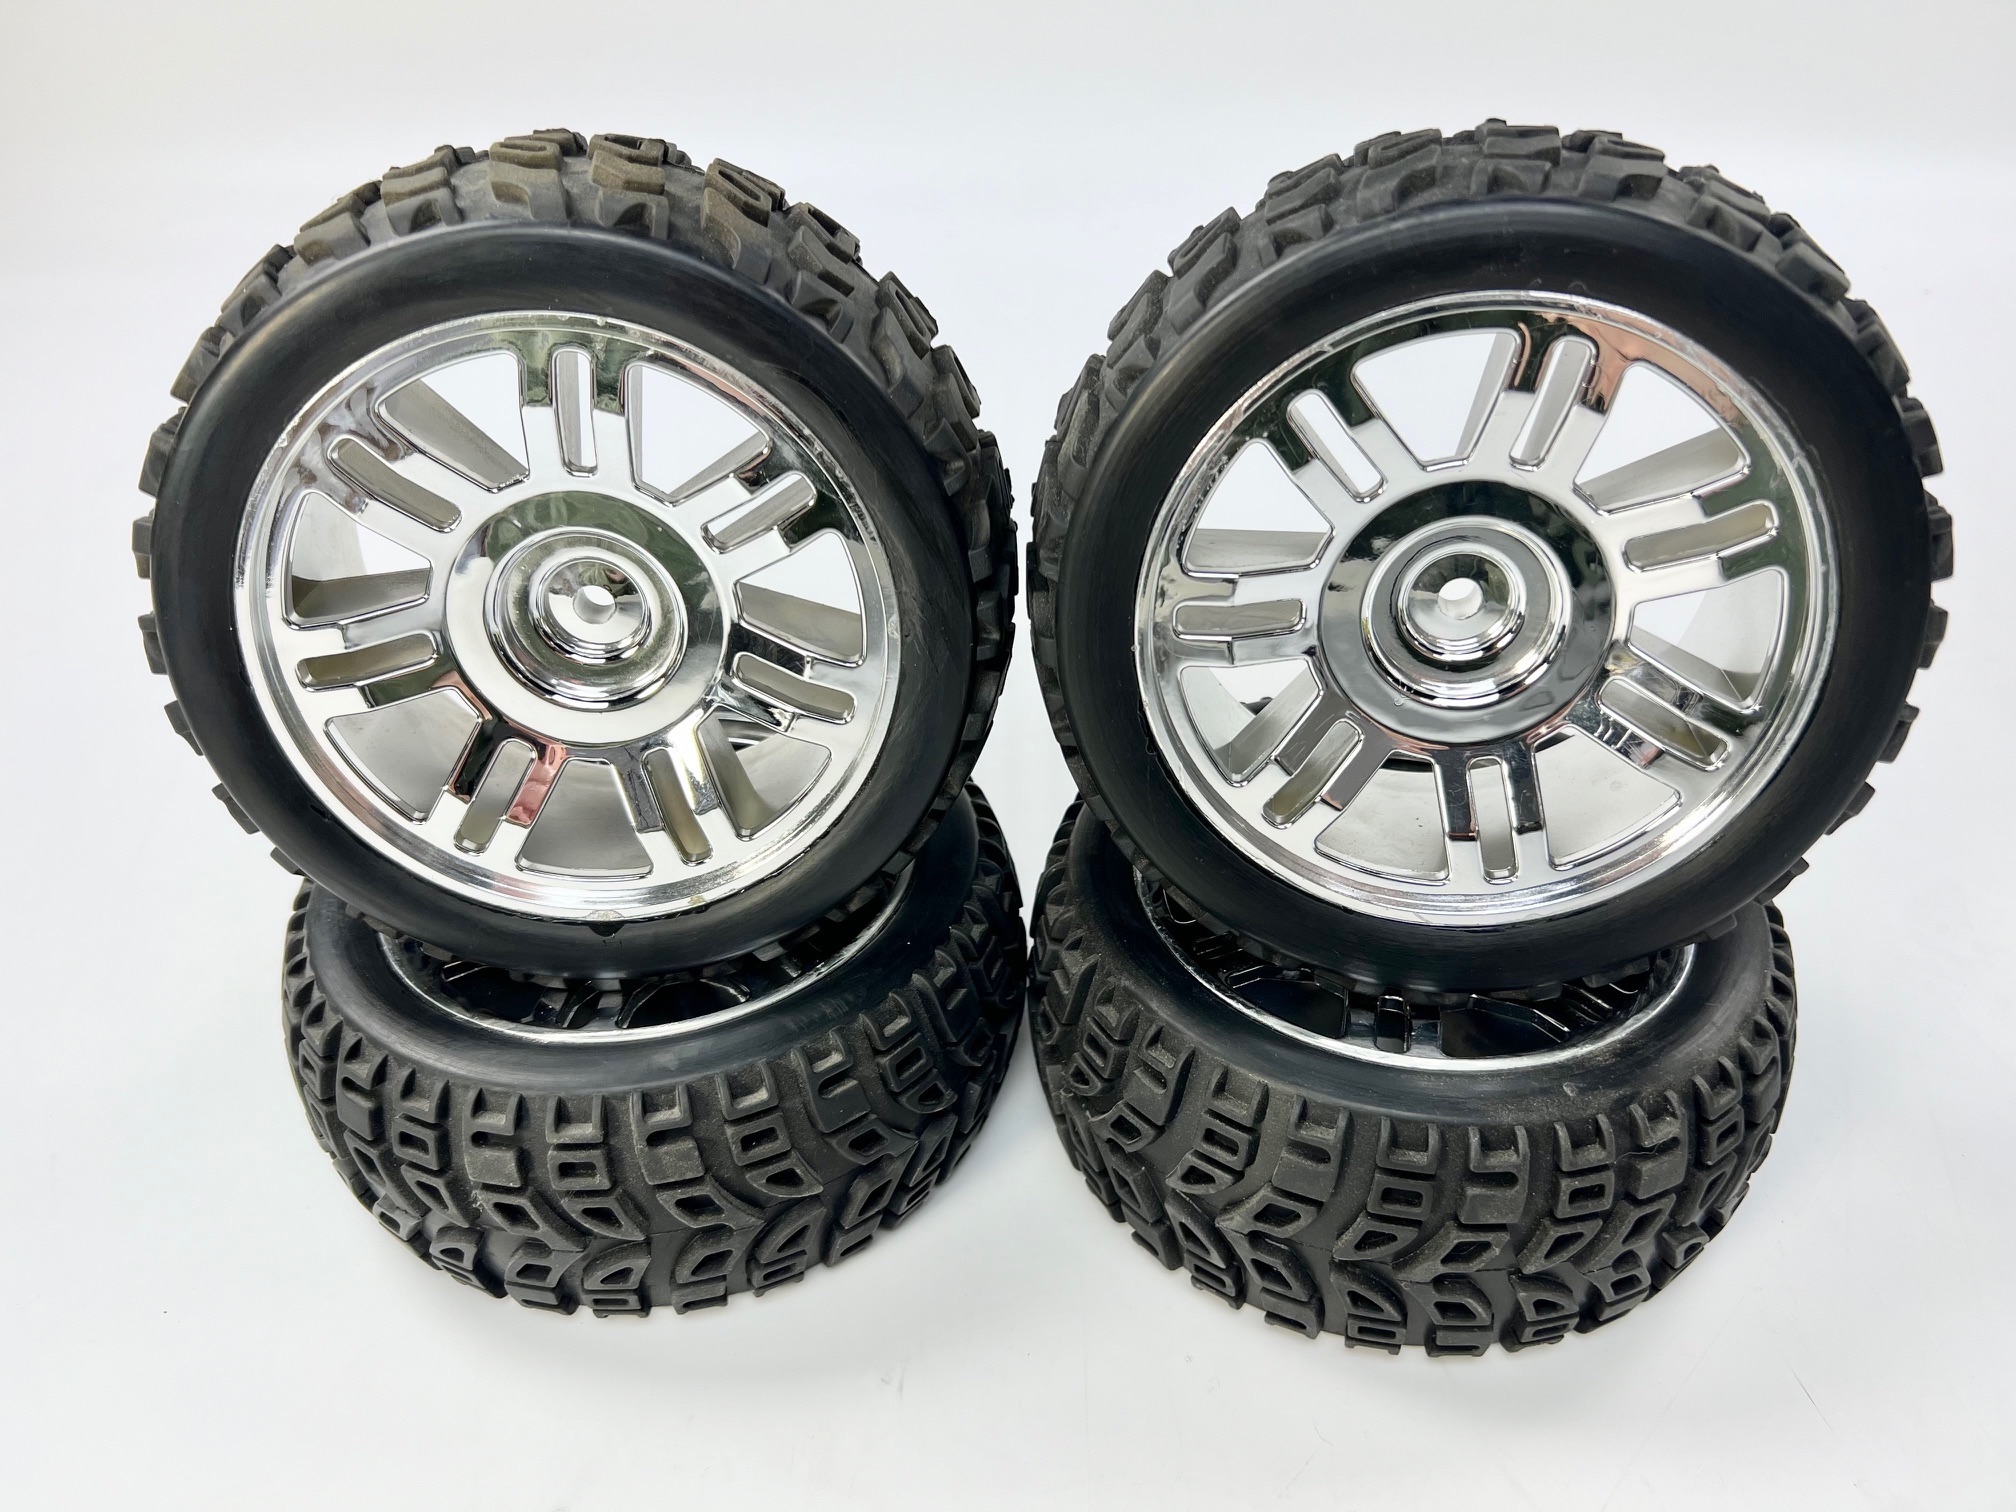 2 pairs of offroad tyres set on chromed double spoke rims ready glued "9"